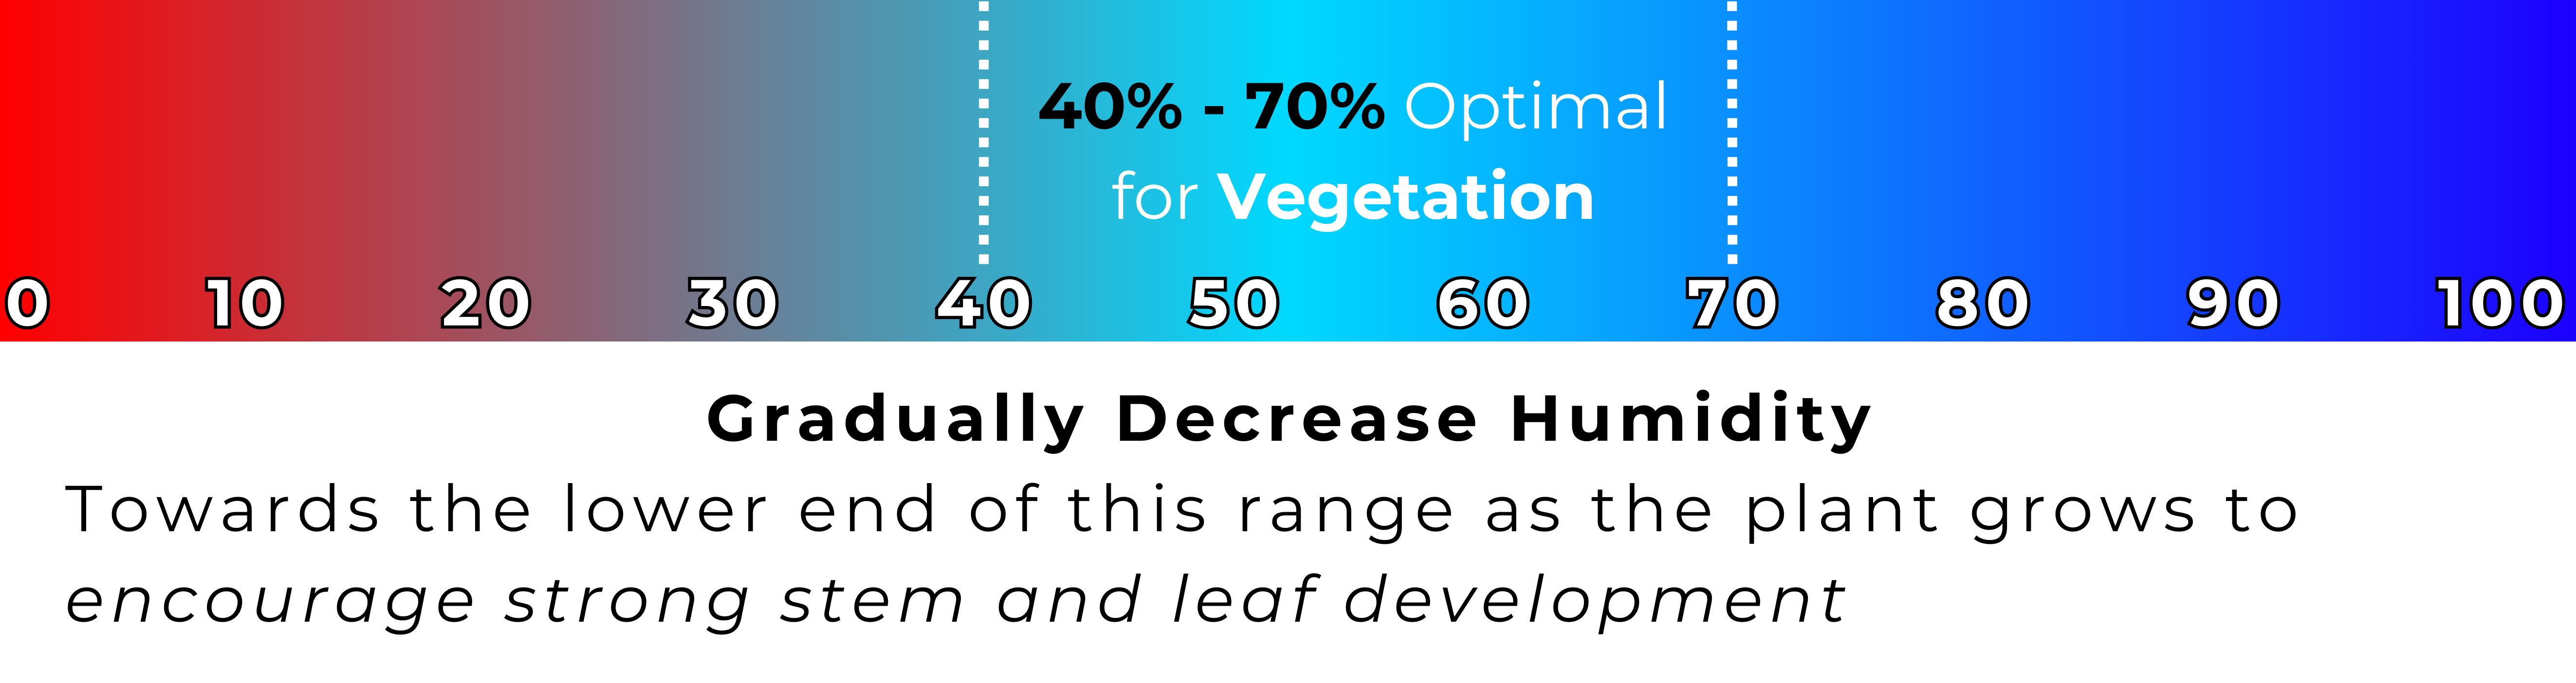 Ideal Humidity Ranges for the Vegetative Stage in Cannabis Cultivation